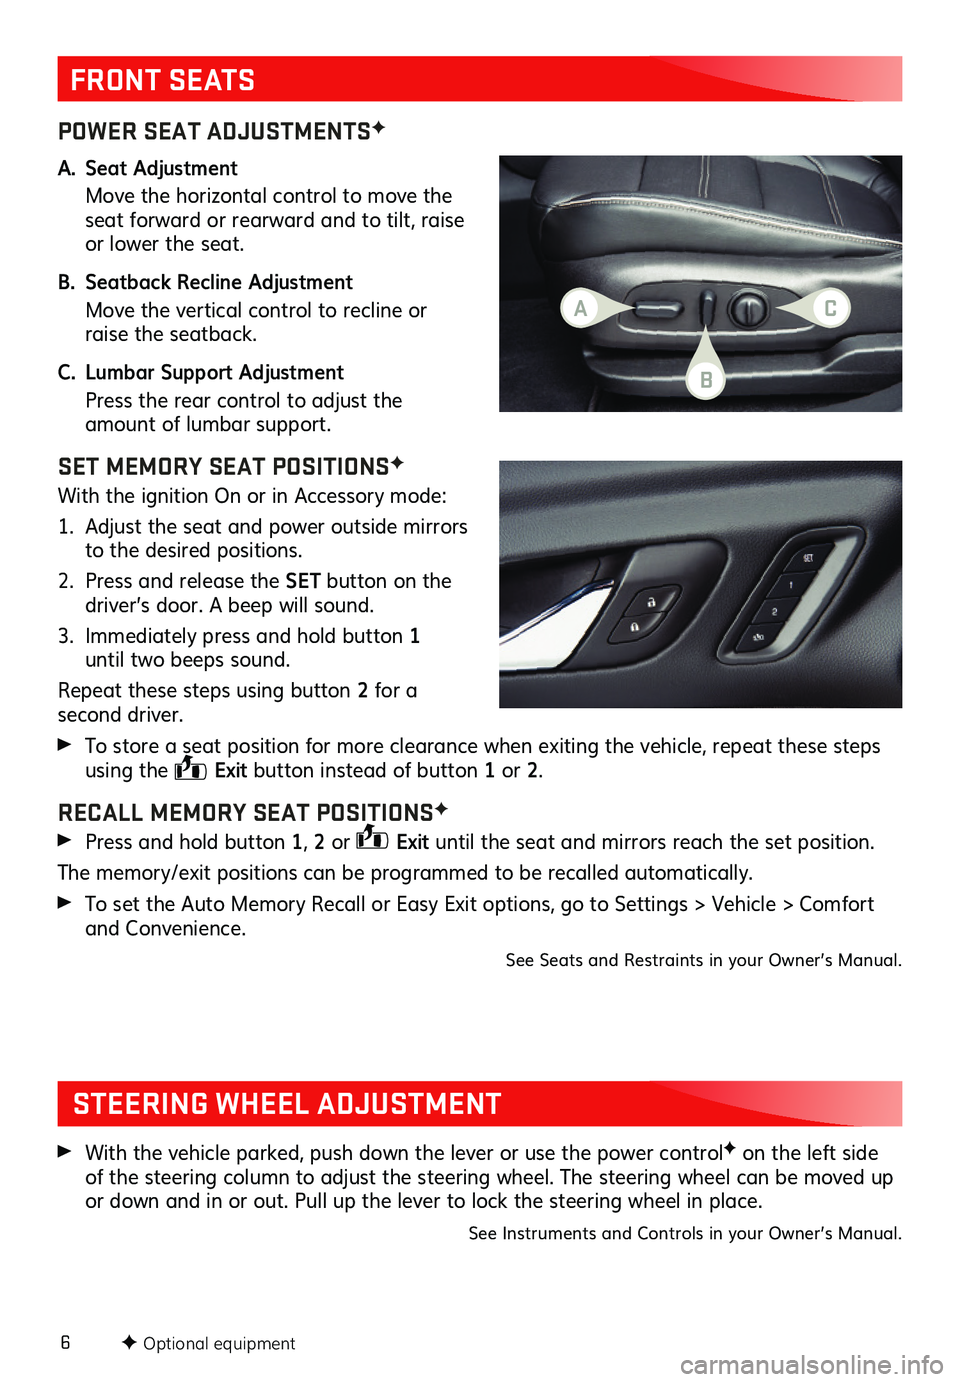 GMC ACADIA 2019  Get To Know Guide 6
POWER SEAT ADJUSTMENTSF
A. Seat Adjustment 
 Move the horizontal control to move the seat forward or rearward and to tilt, raise or lower the seat. 
B. Seatback Recline Adjustment
 Move the vertical